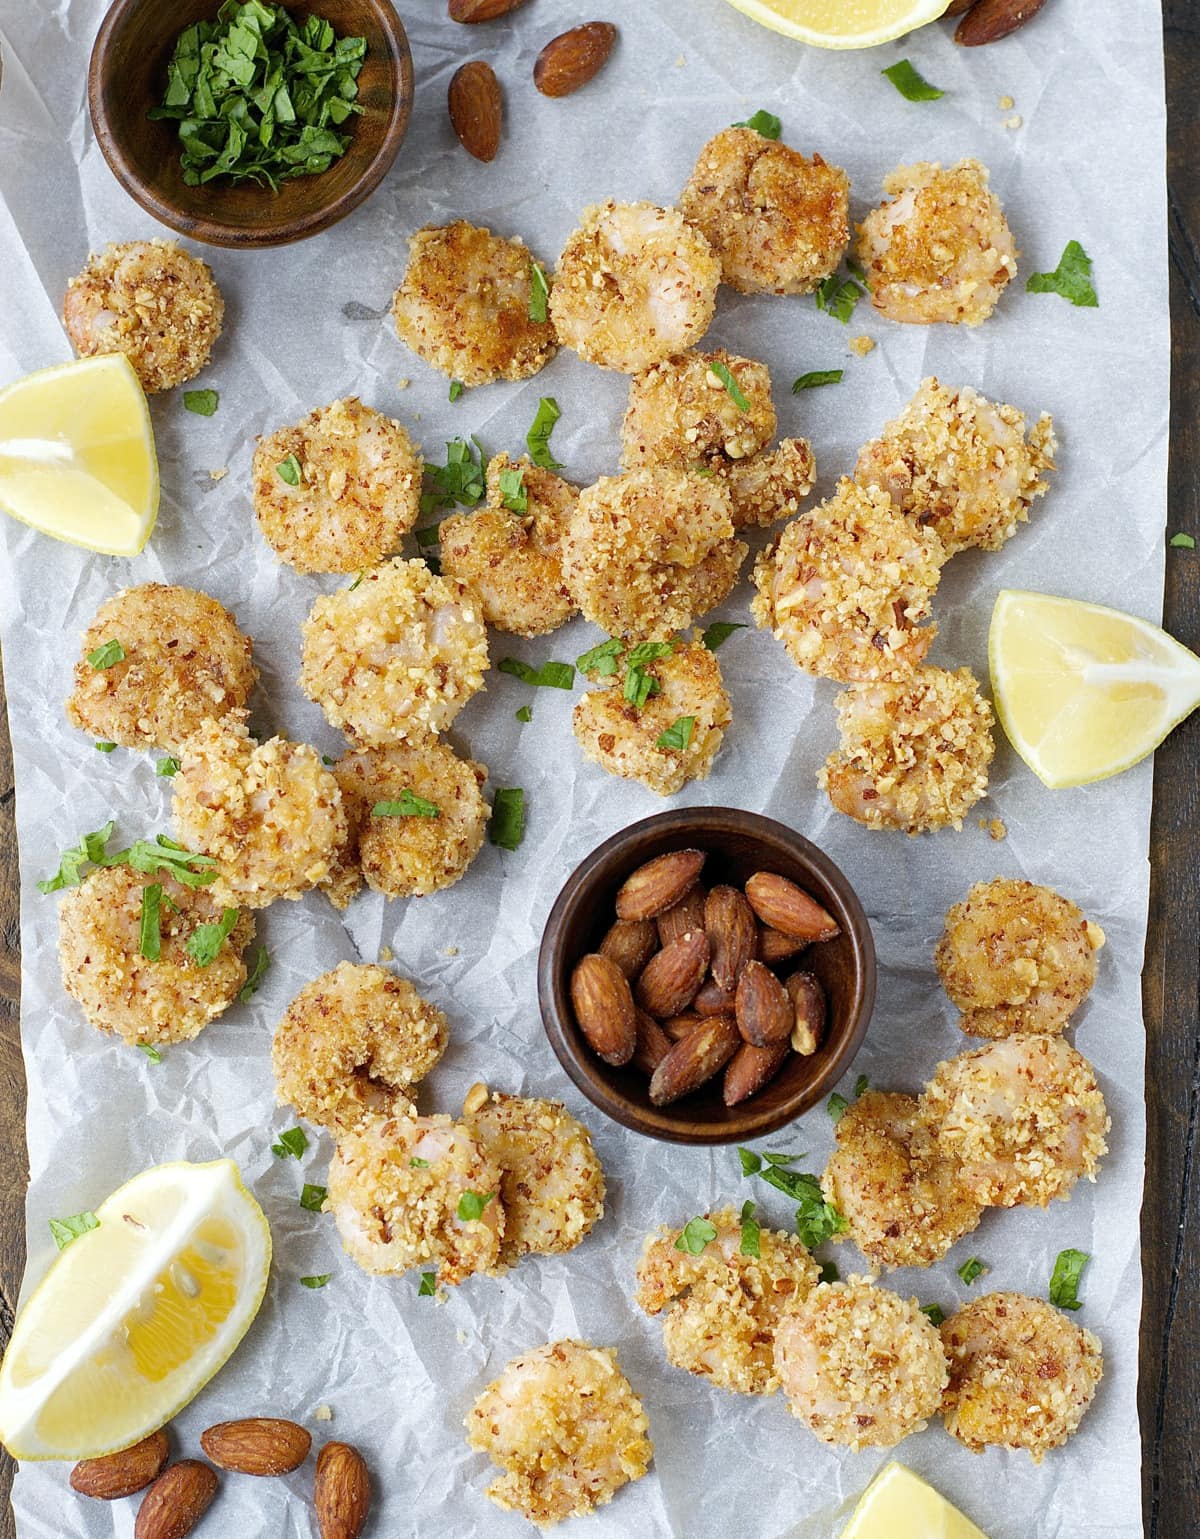 These easy Keto Popcorn Shrimp are the perfect crispy, crunchy irresistible snack for a lighter game day treat!